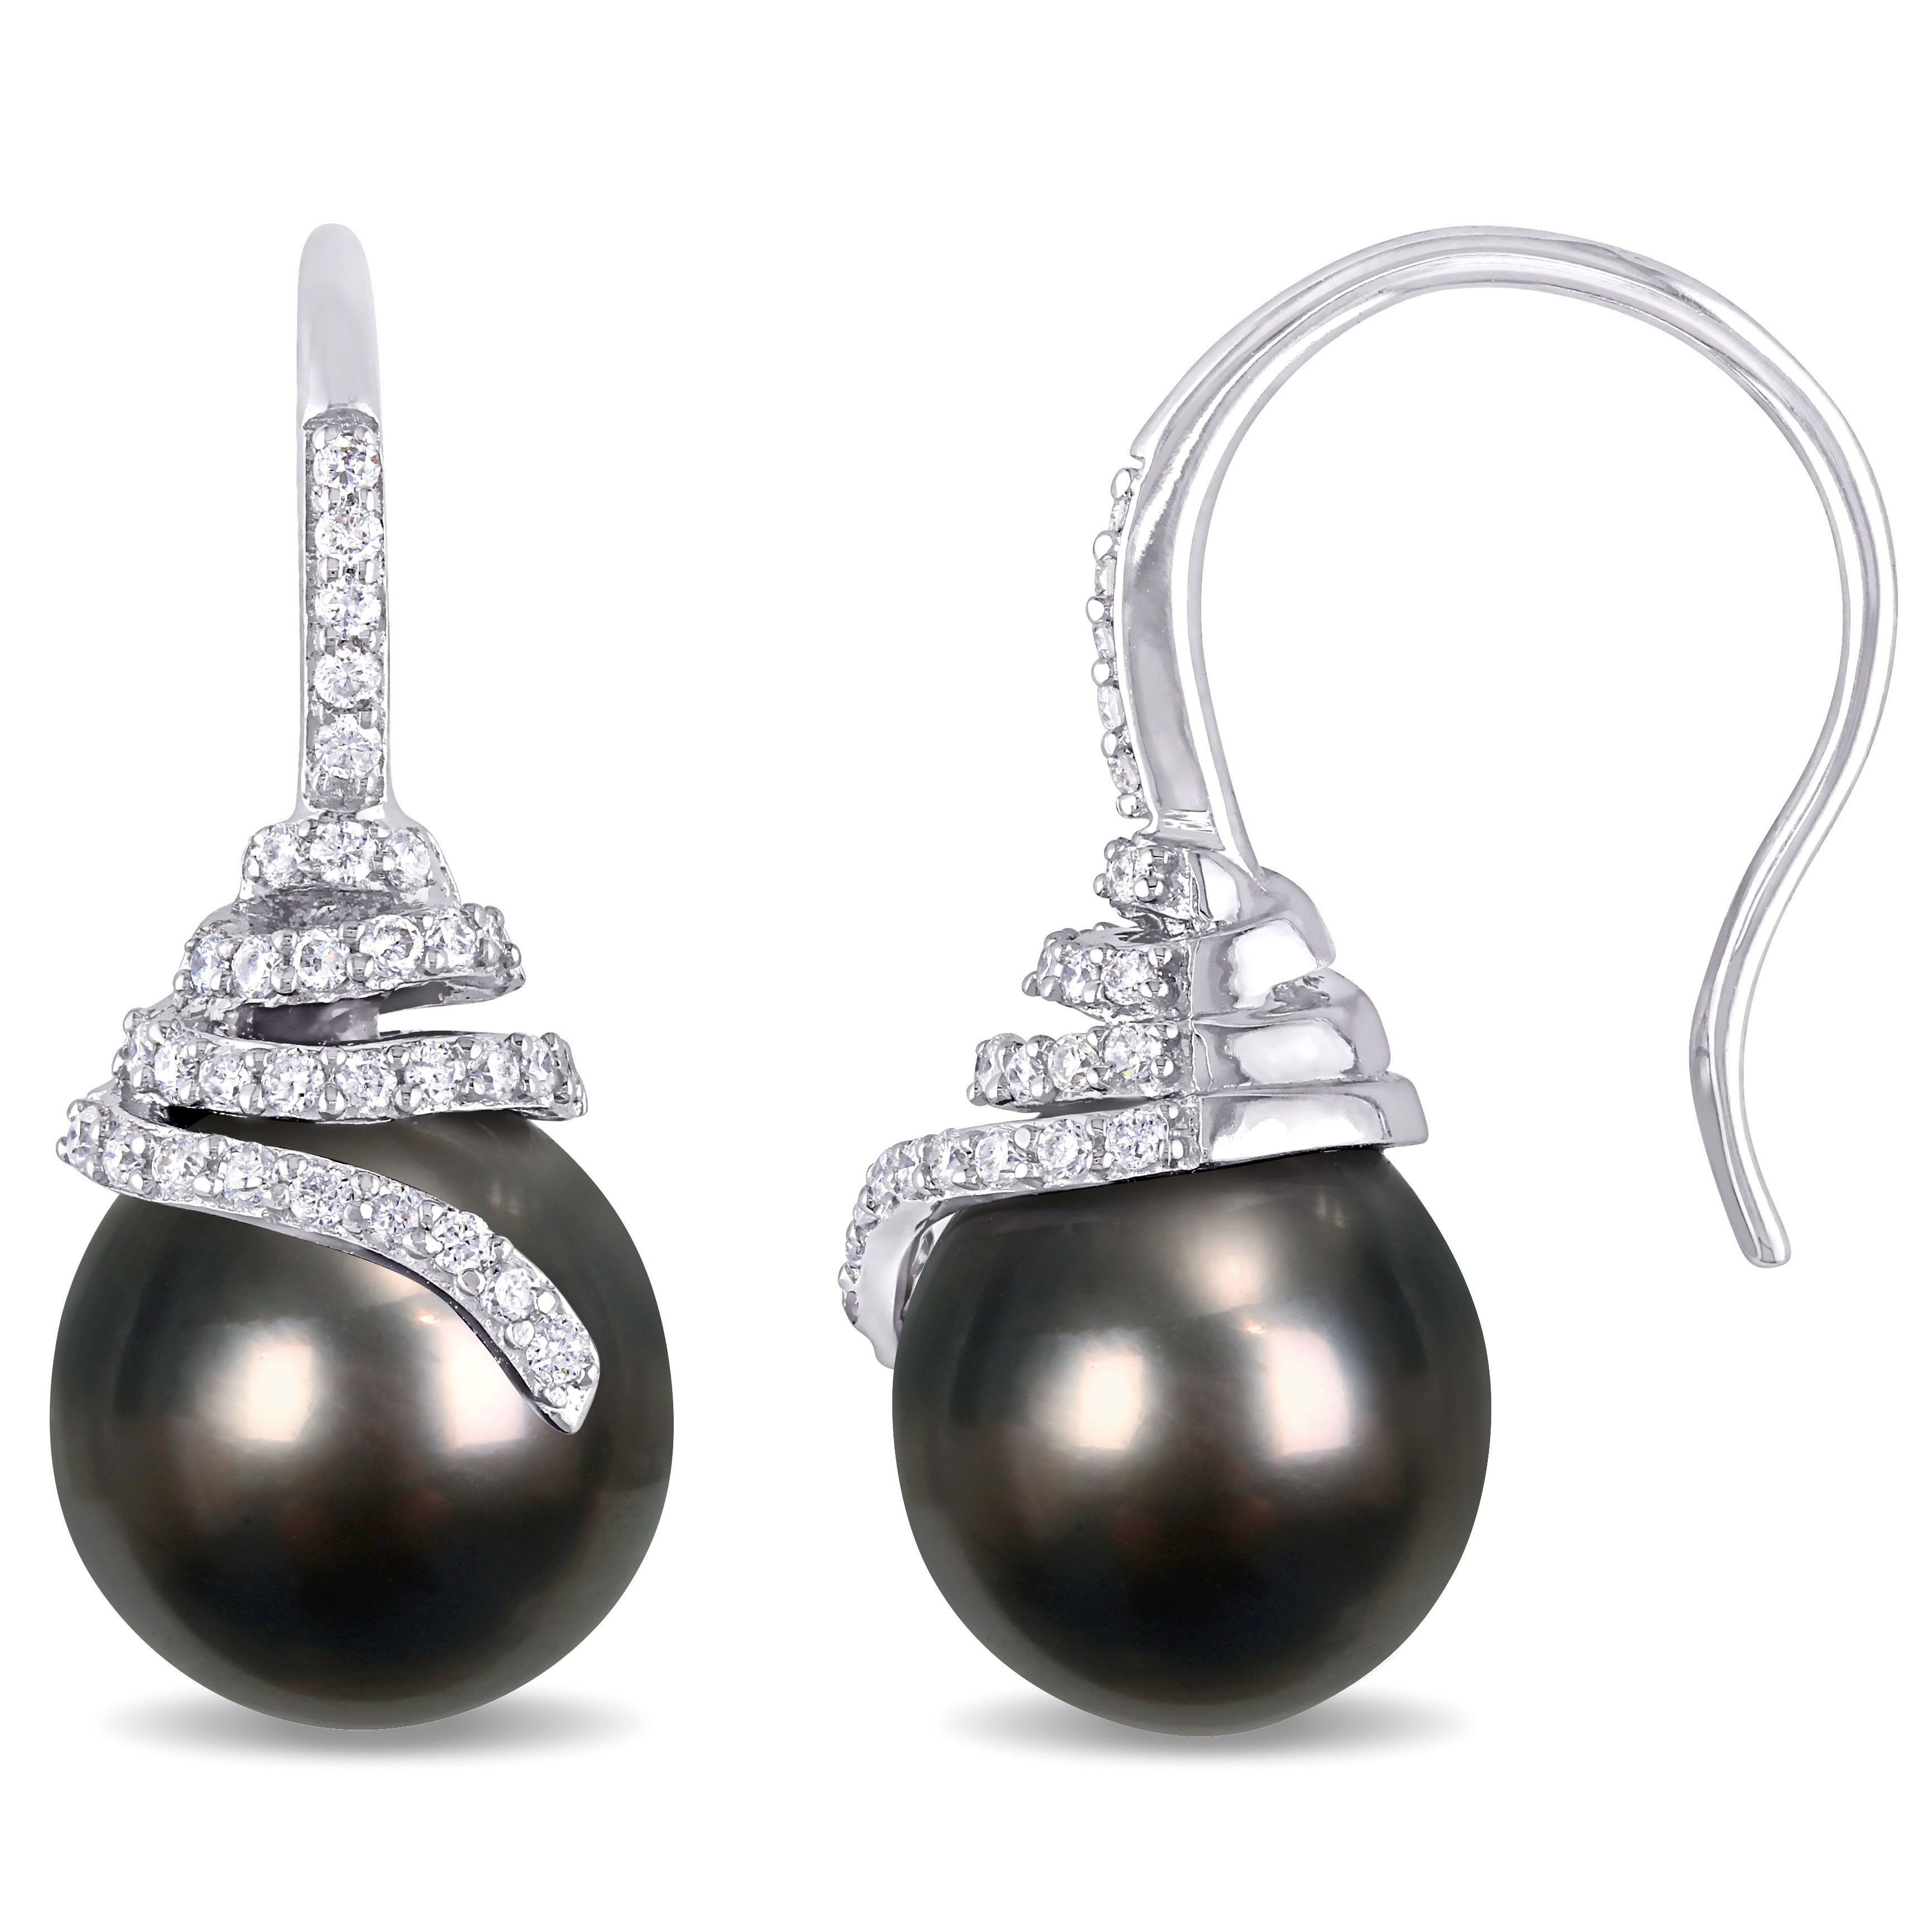 10 - 10.5 MM Black Tahitian Cultured Pearl and 1/3 CT TW Diamond Spiral Drop Earrings in 14k Yellow Gold